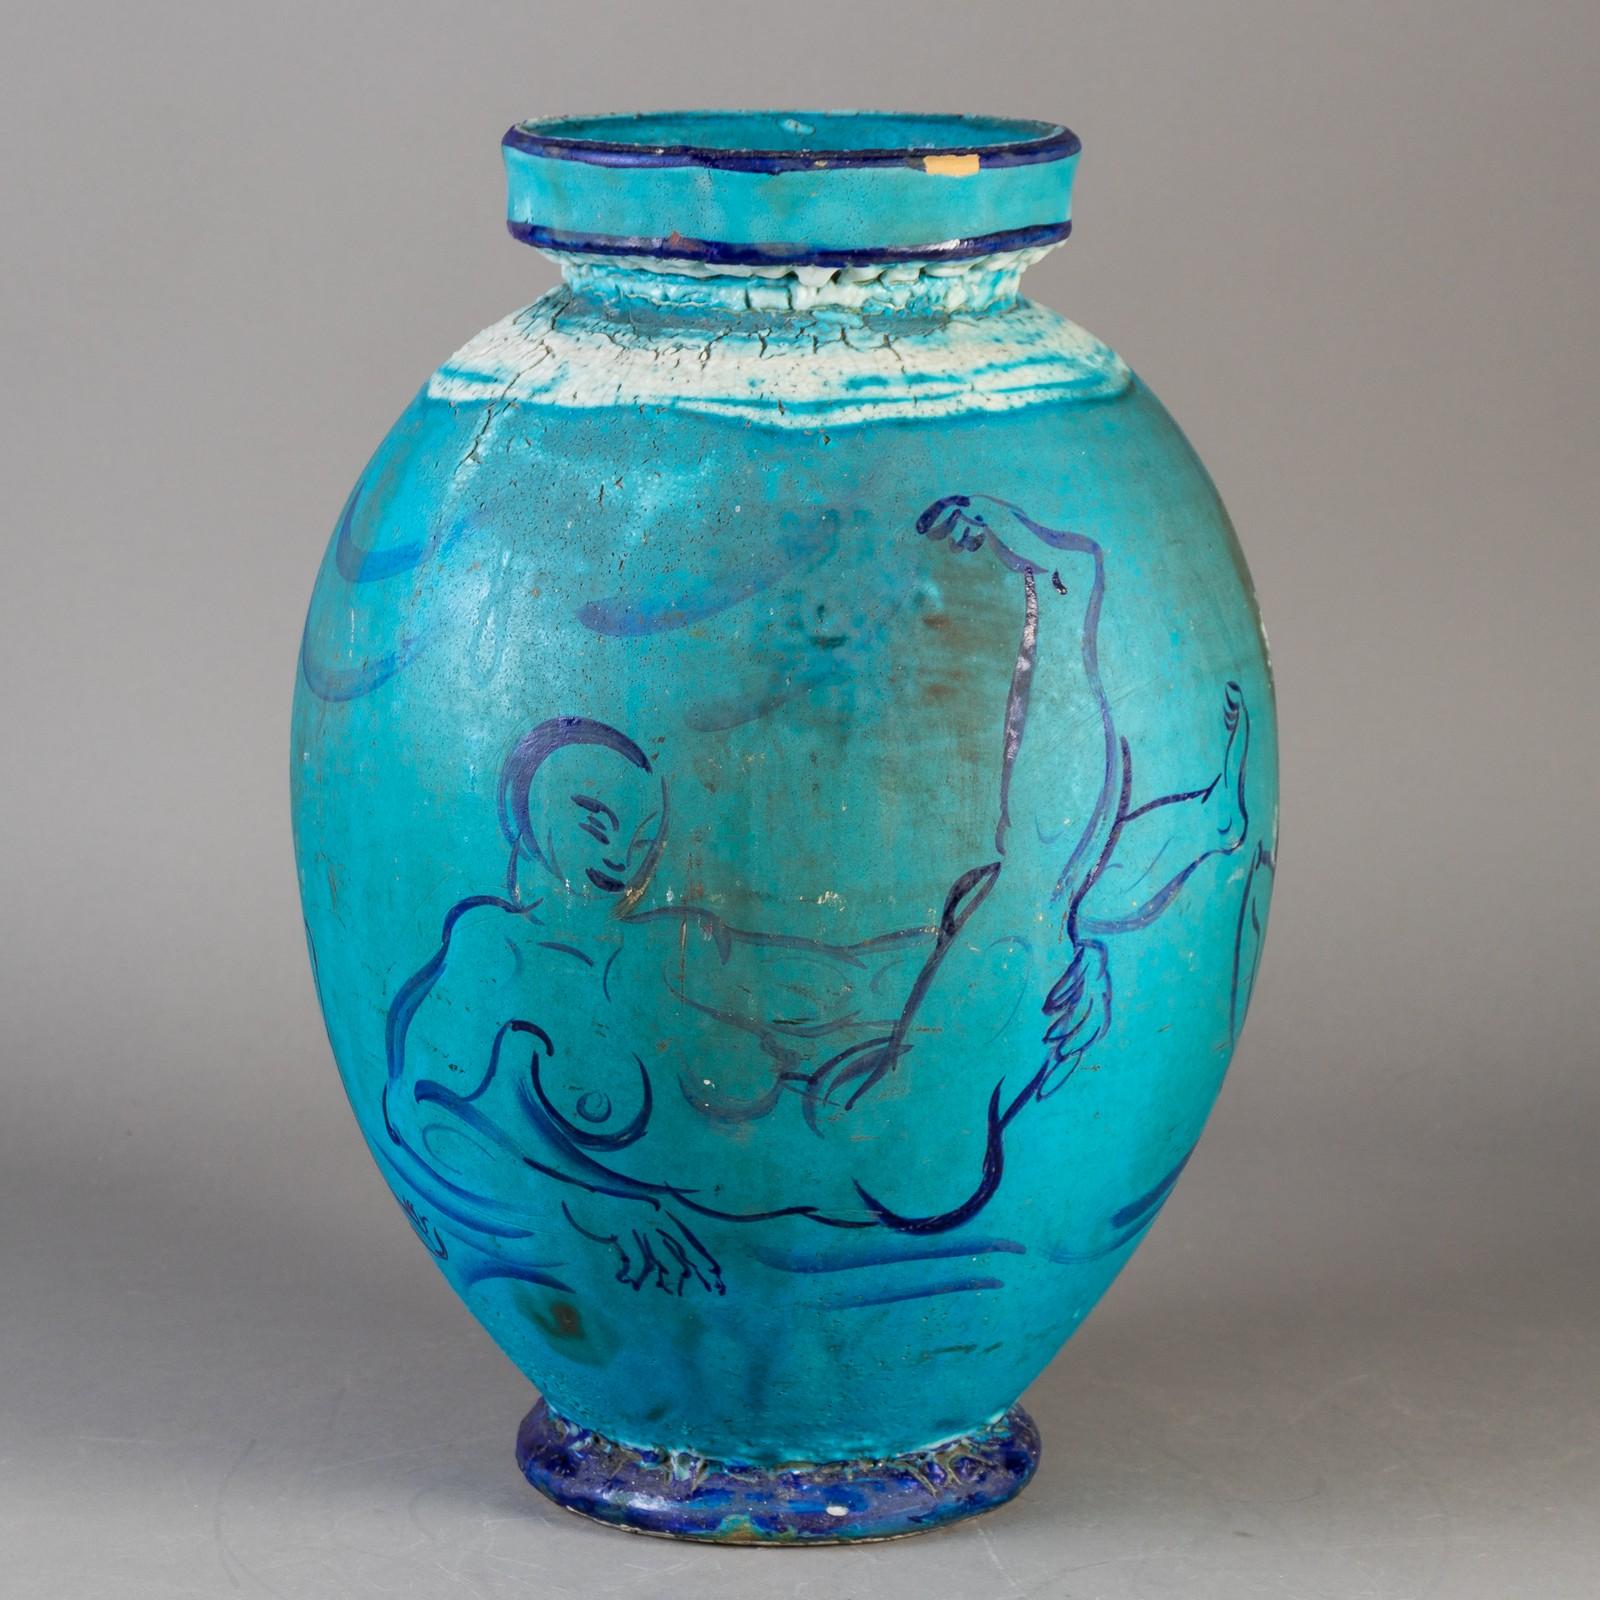 This unique piece of Kahler pottery is an experimental item made by Helge Daner Jensen who worked at Kahler Keramik in Naesvedt, Denmark 1918-1937 
It has figural decoration and a rich turquoise glaze.
      